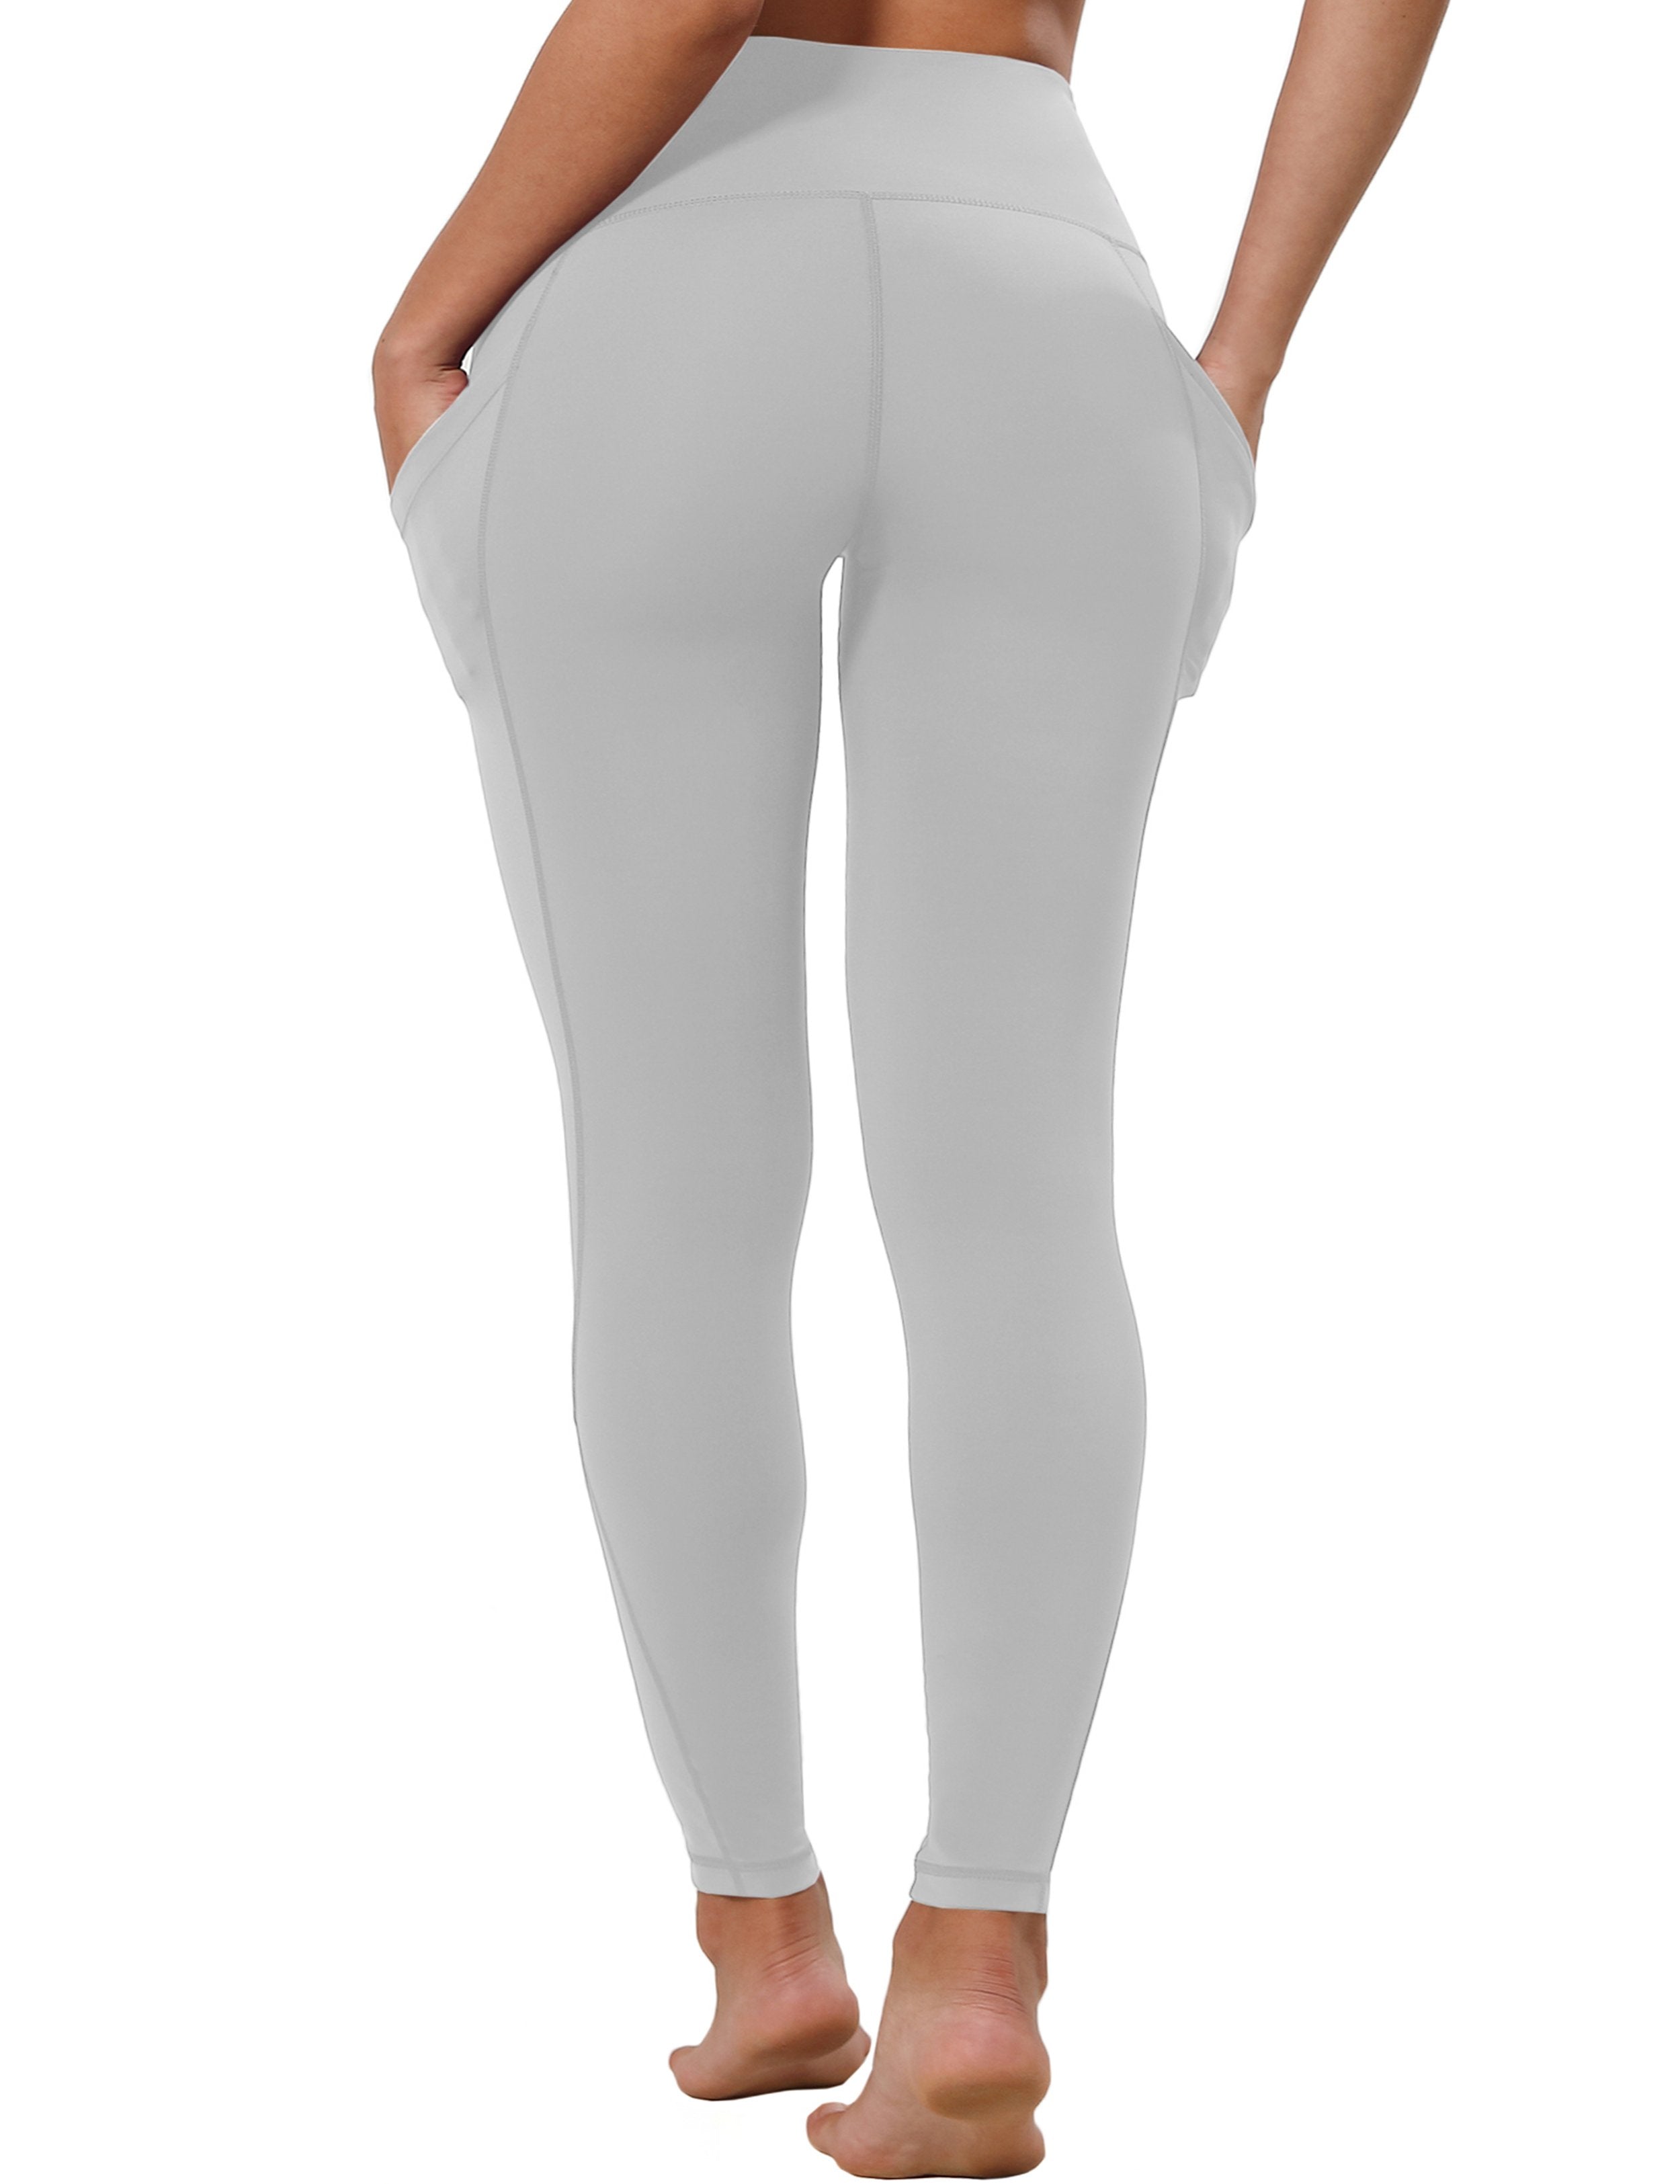 High Waist Side Pockets Tall Size Pants lightgray 75% Nylon, 25% Spandex Fabric doesn't attract lint easily 4-way stretch No see-through Moisture-wicking Tummy control Inner pocket